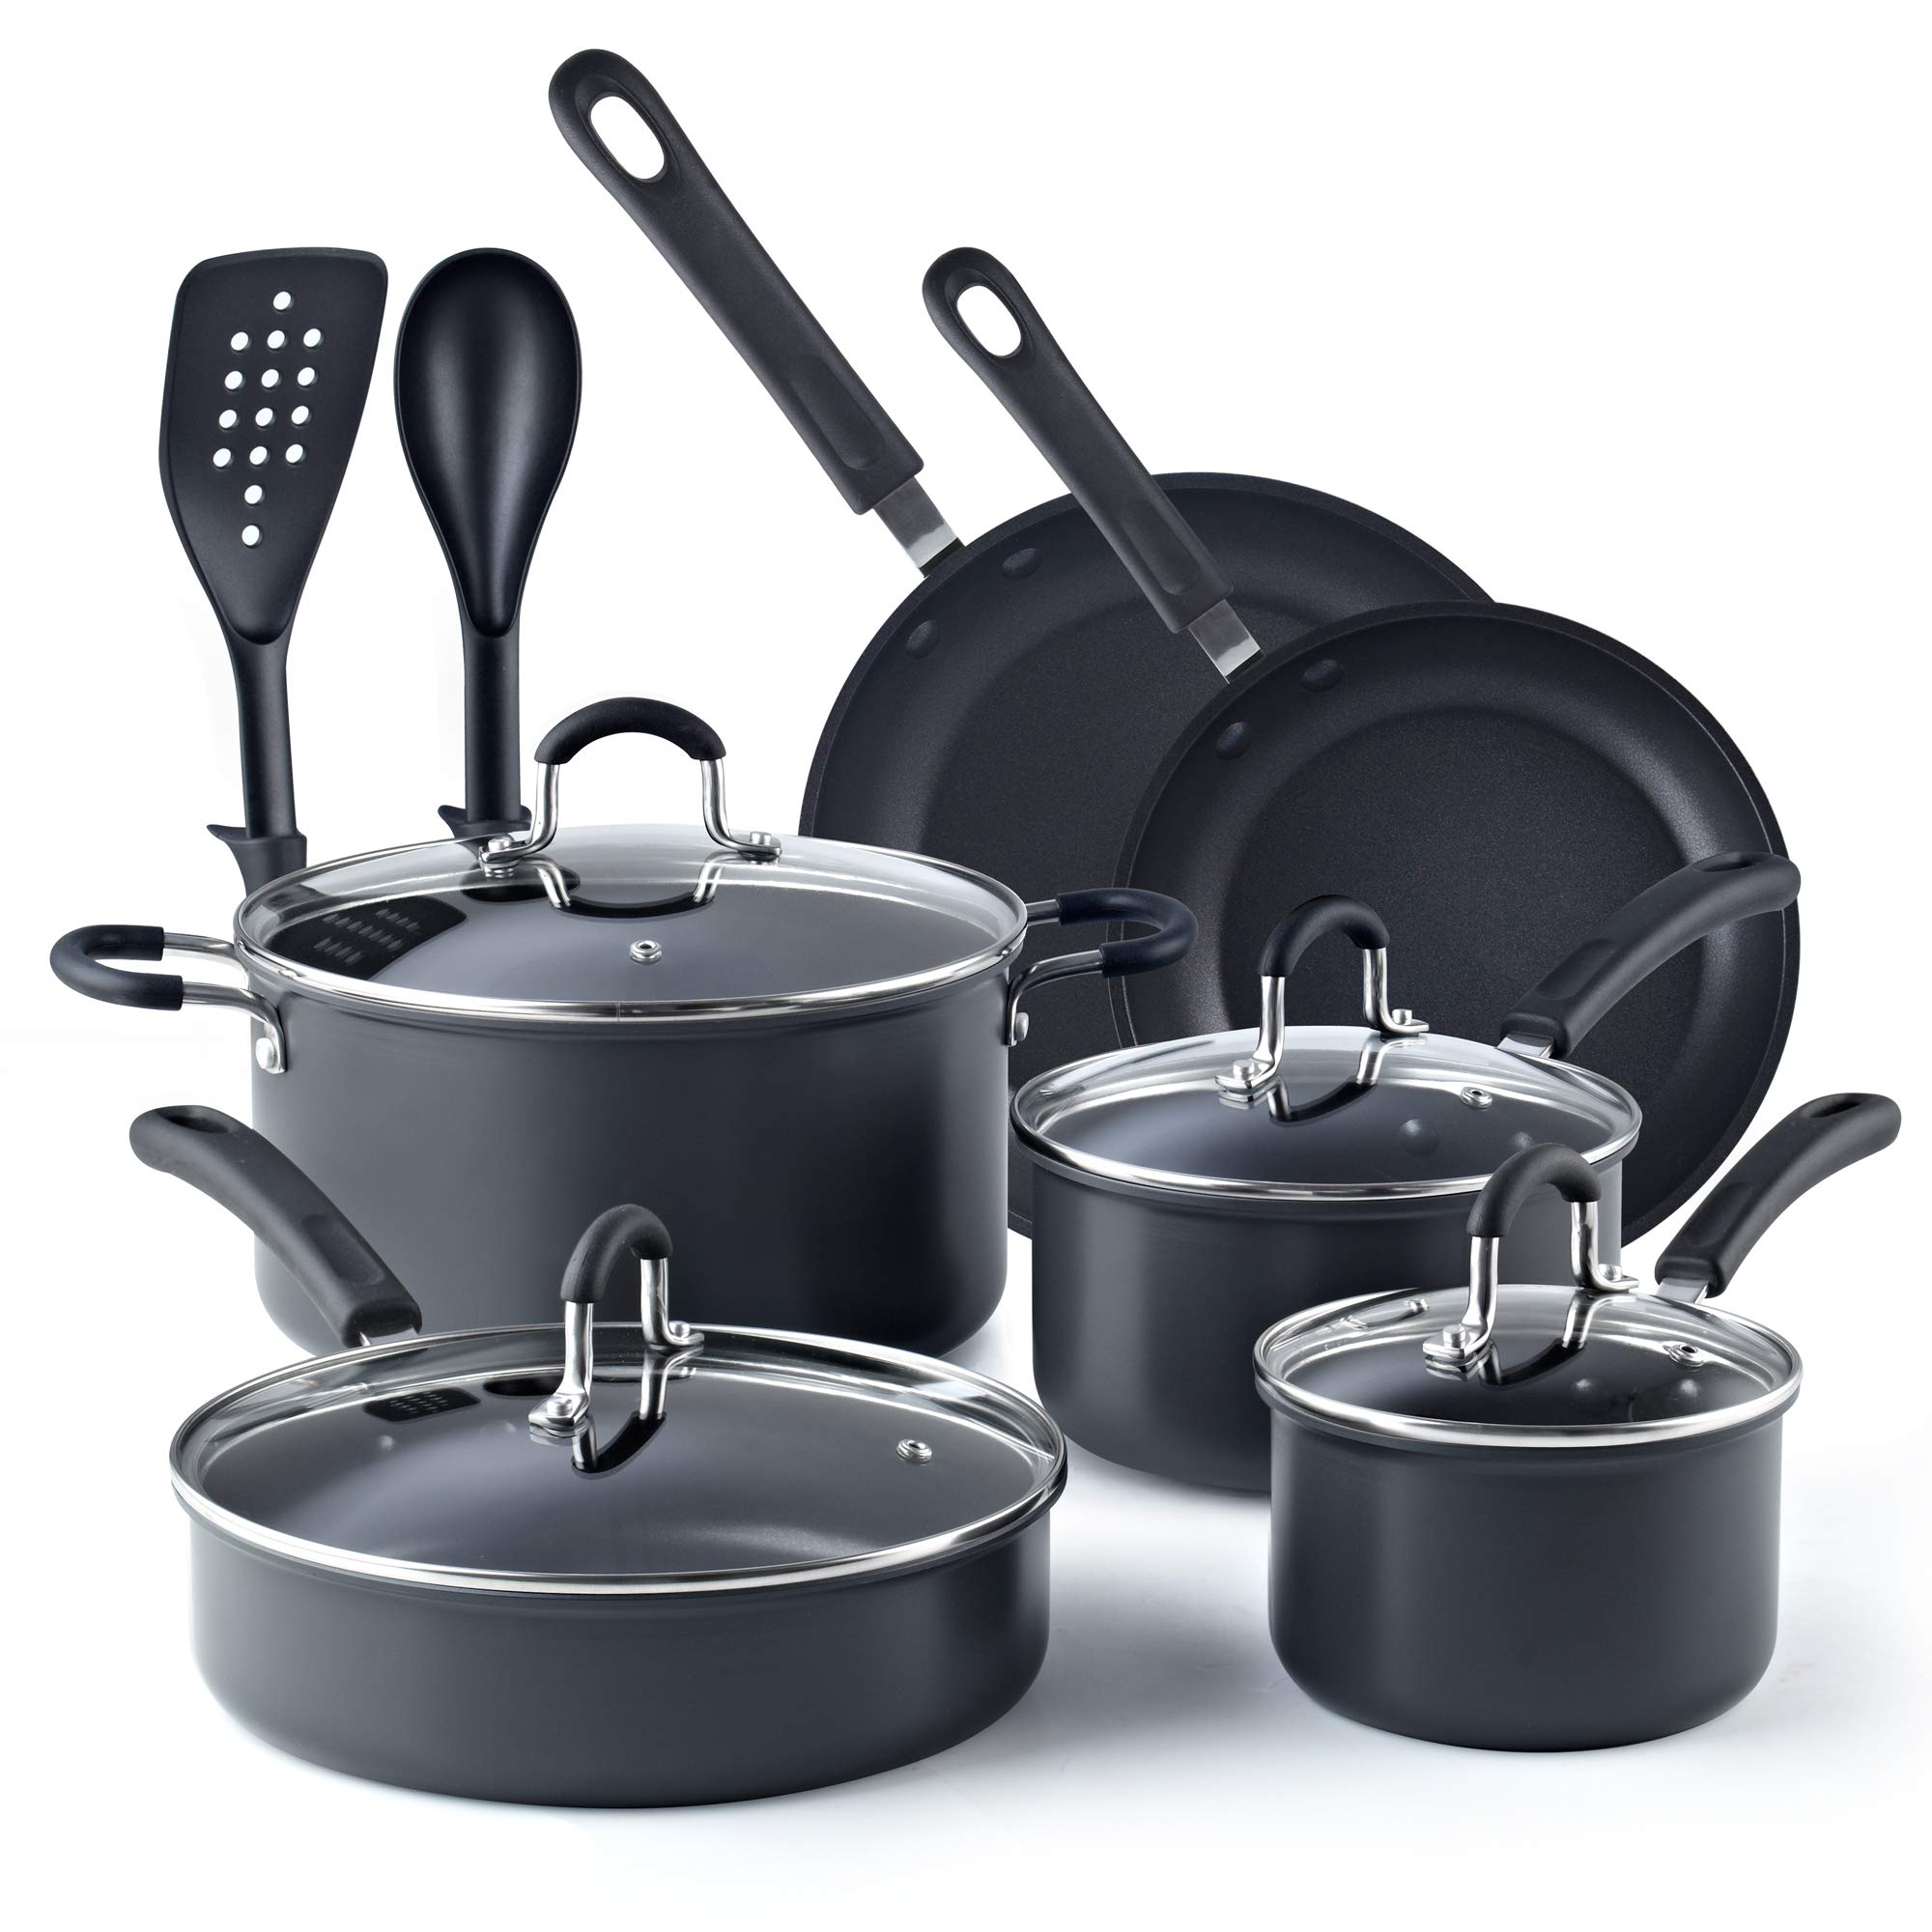 12-Pc Cook N Home Nonstick Hard Anodized Cookware Set $85.70 + Free Shipping